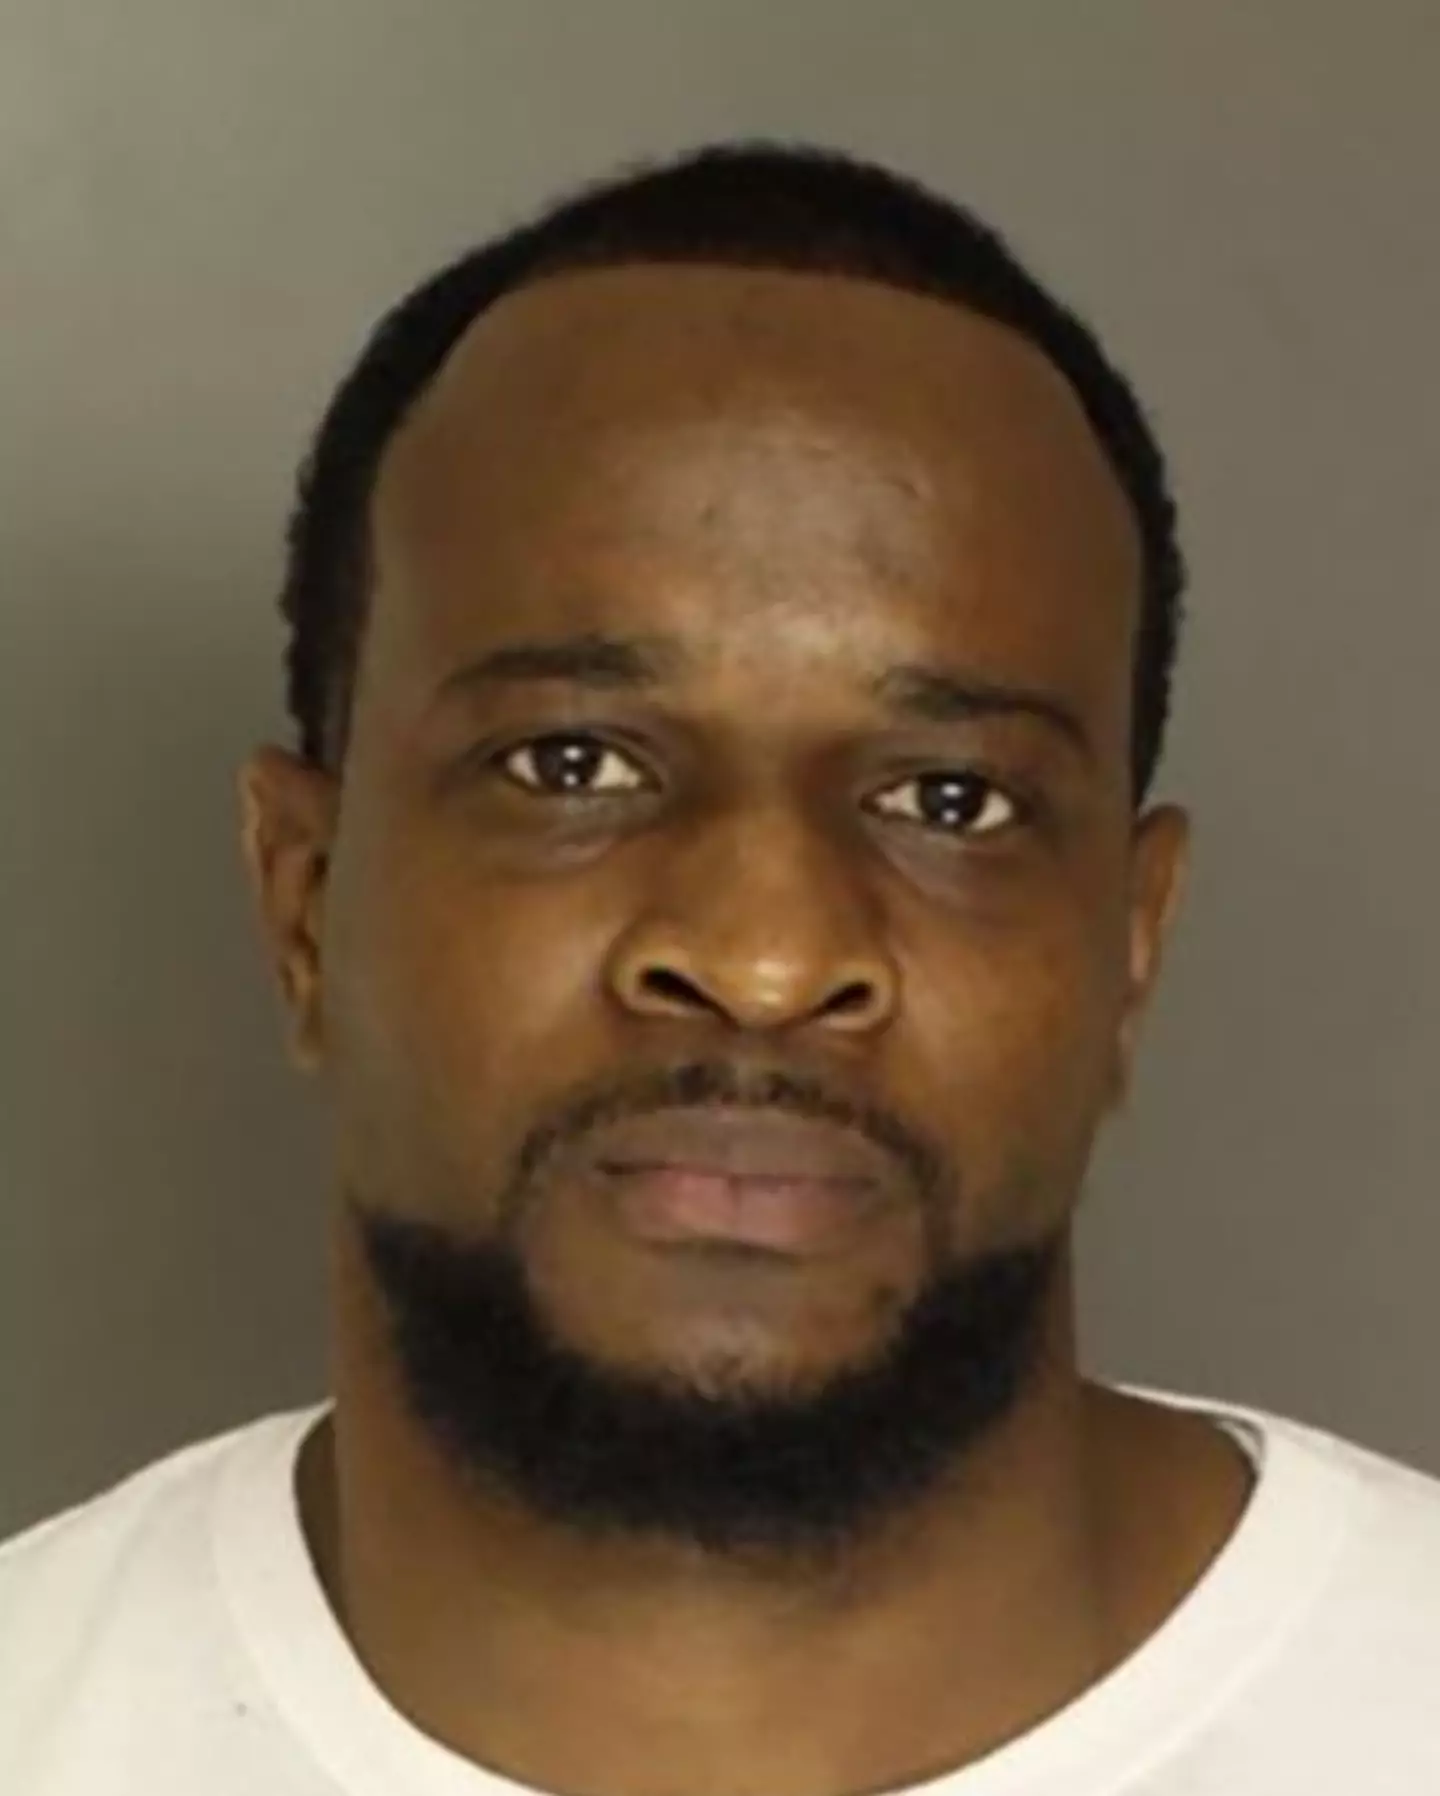 Michael Baltimore, seen here in a 2021 mugshot, was arrested on January 13.